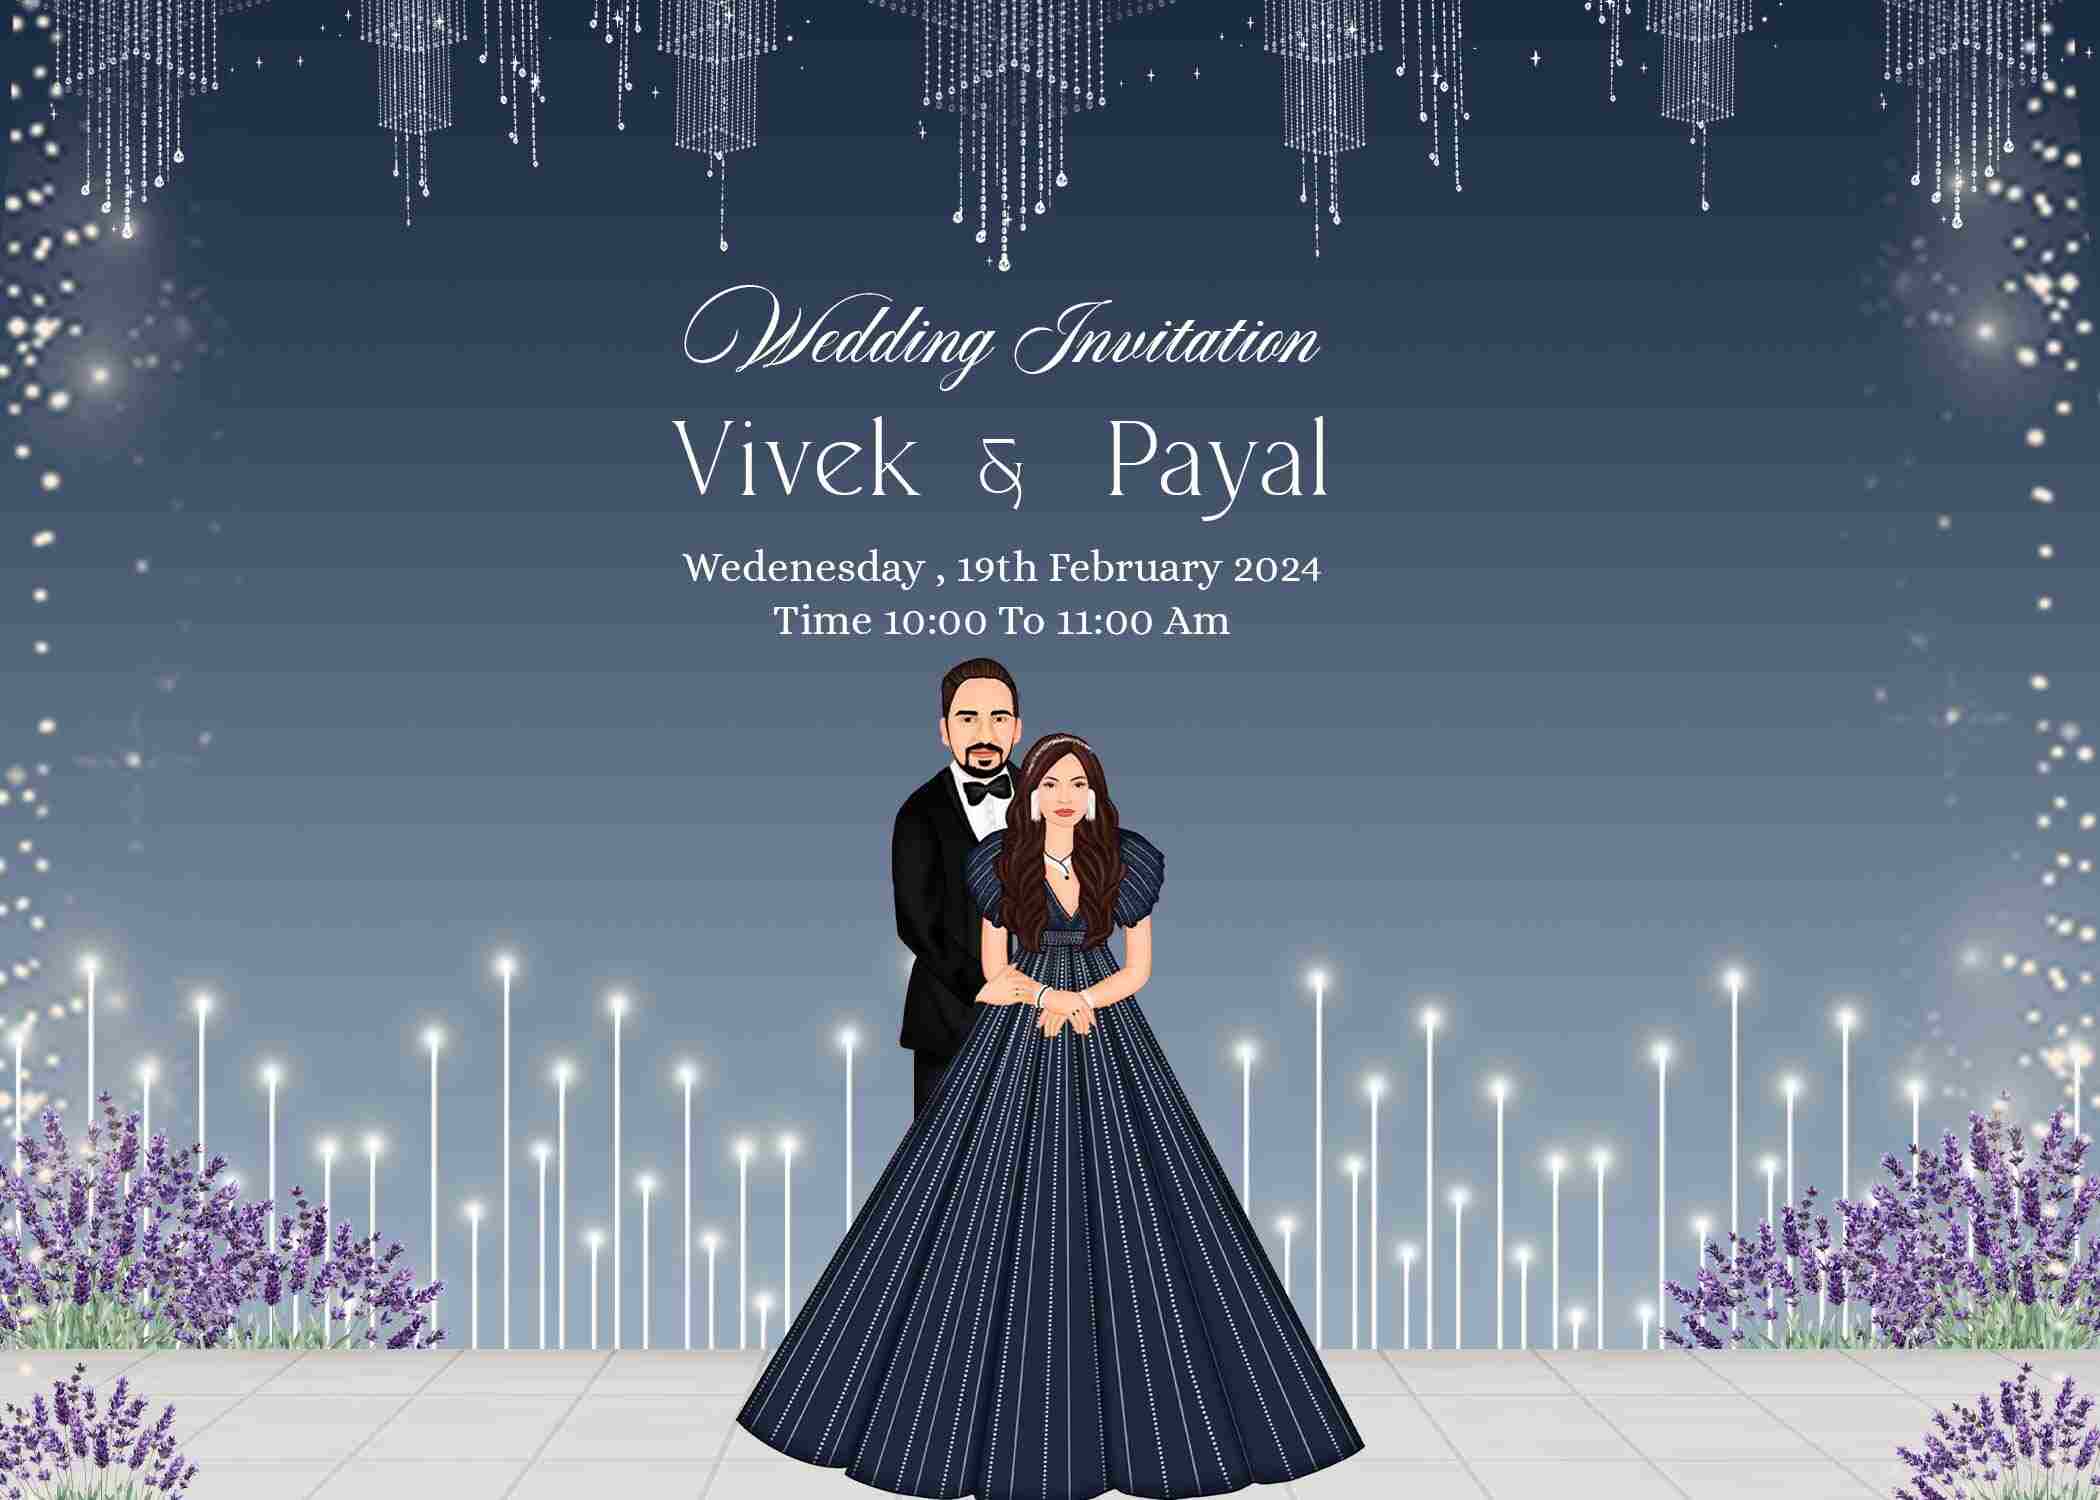 Video Invitation for Wedding: A Modern Twist to Your Special Day